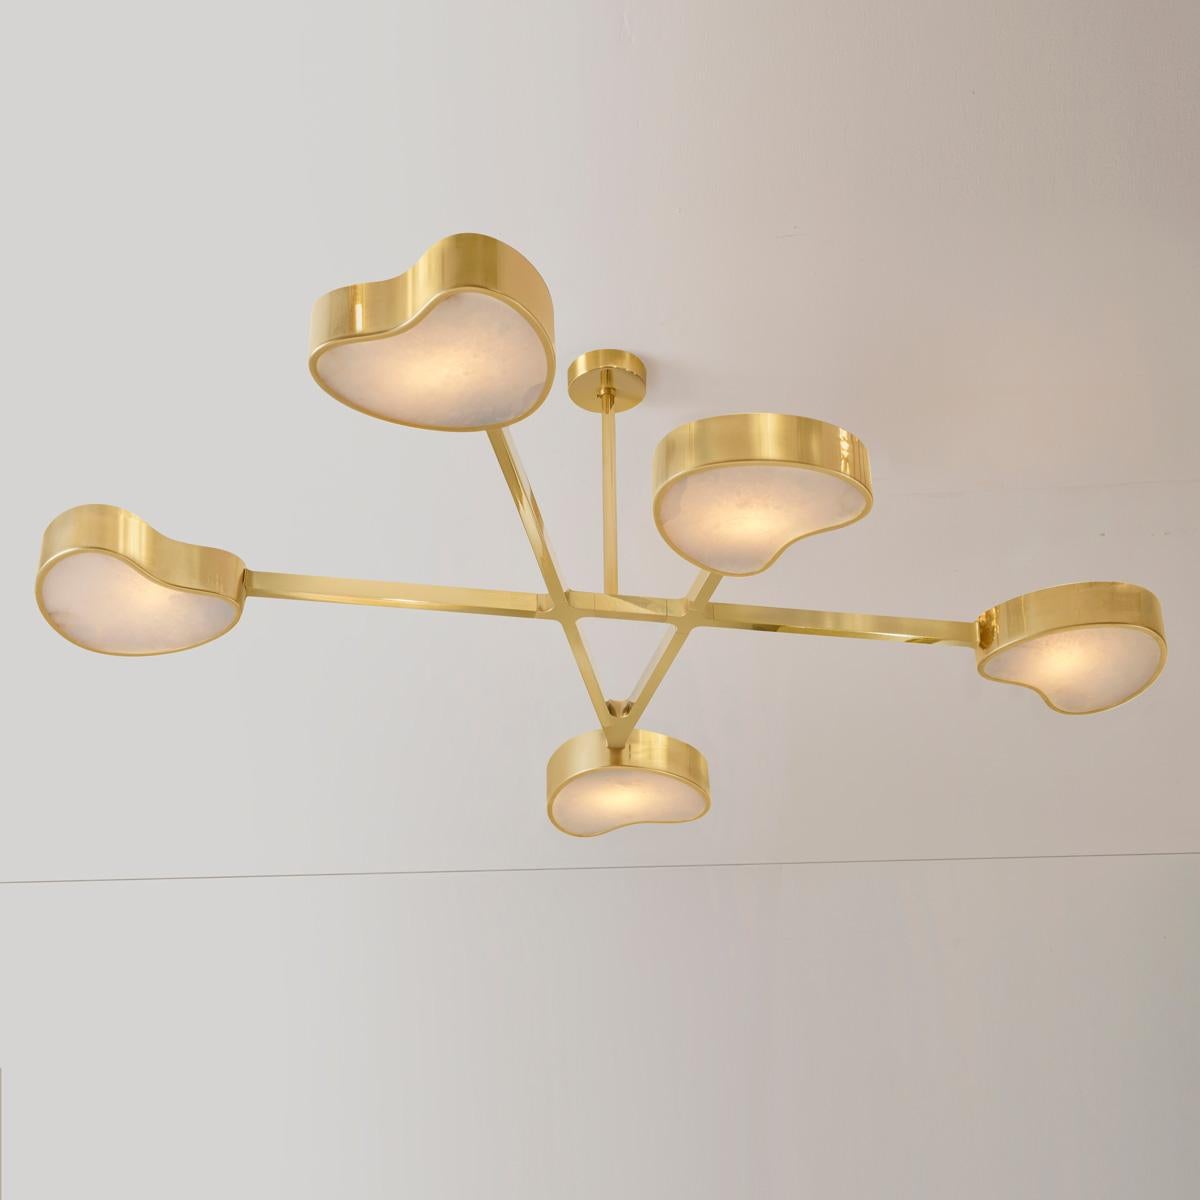 Modern Cuore N.5 Ceiling Light by Gaspare Asaro. Polished Brass Finish For Sale